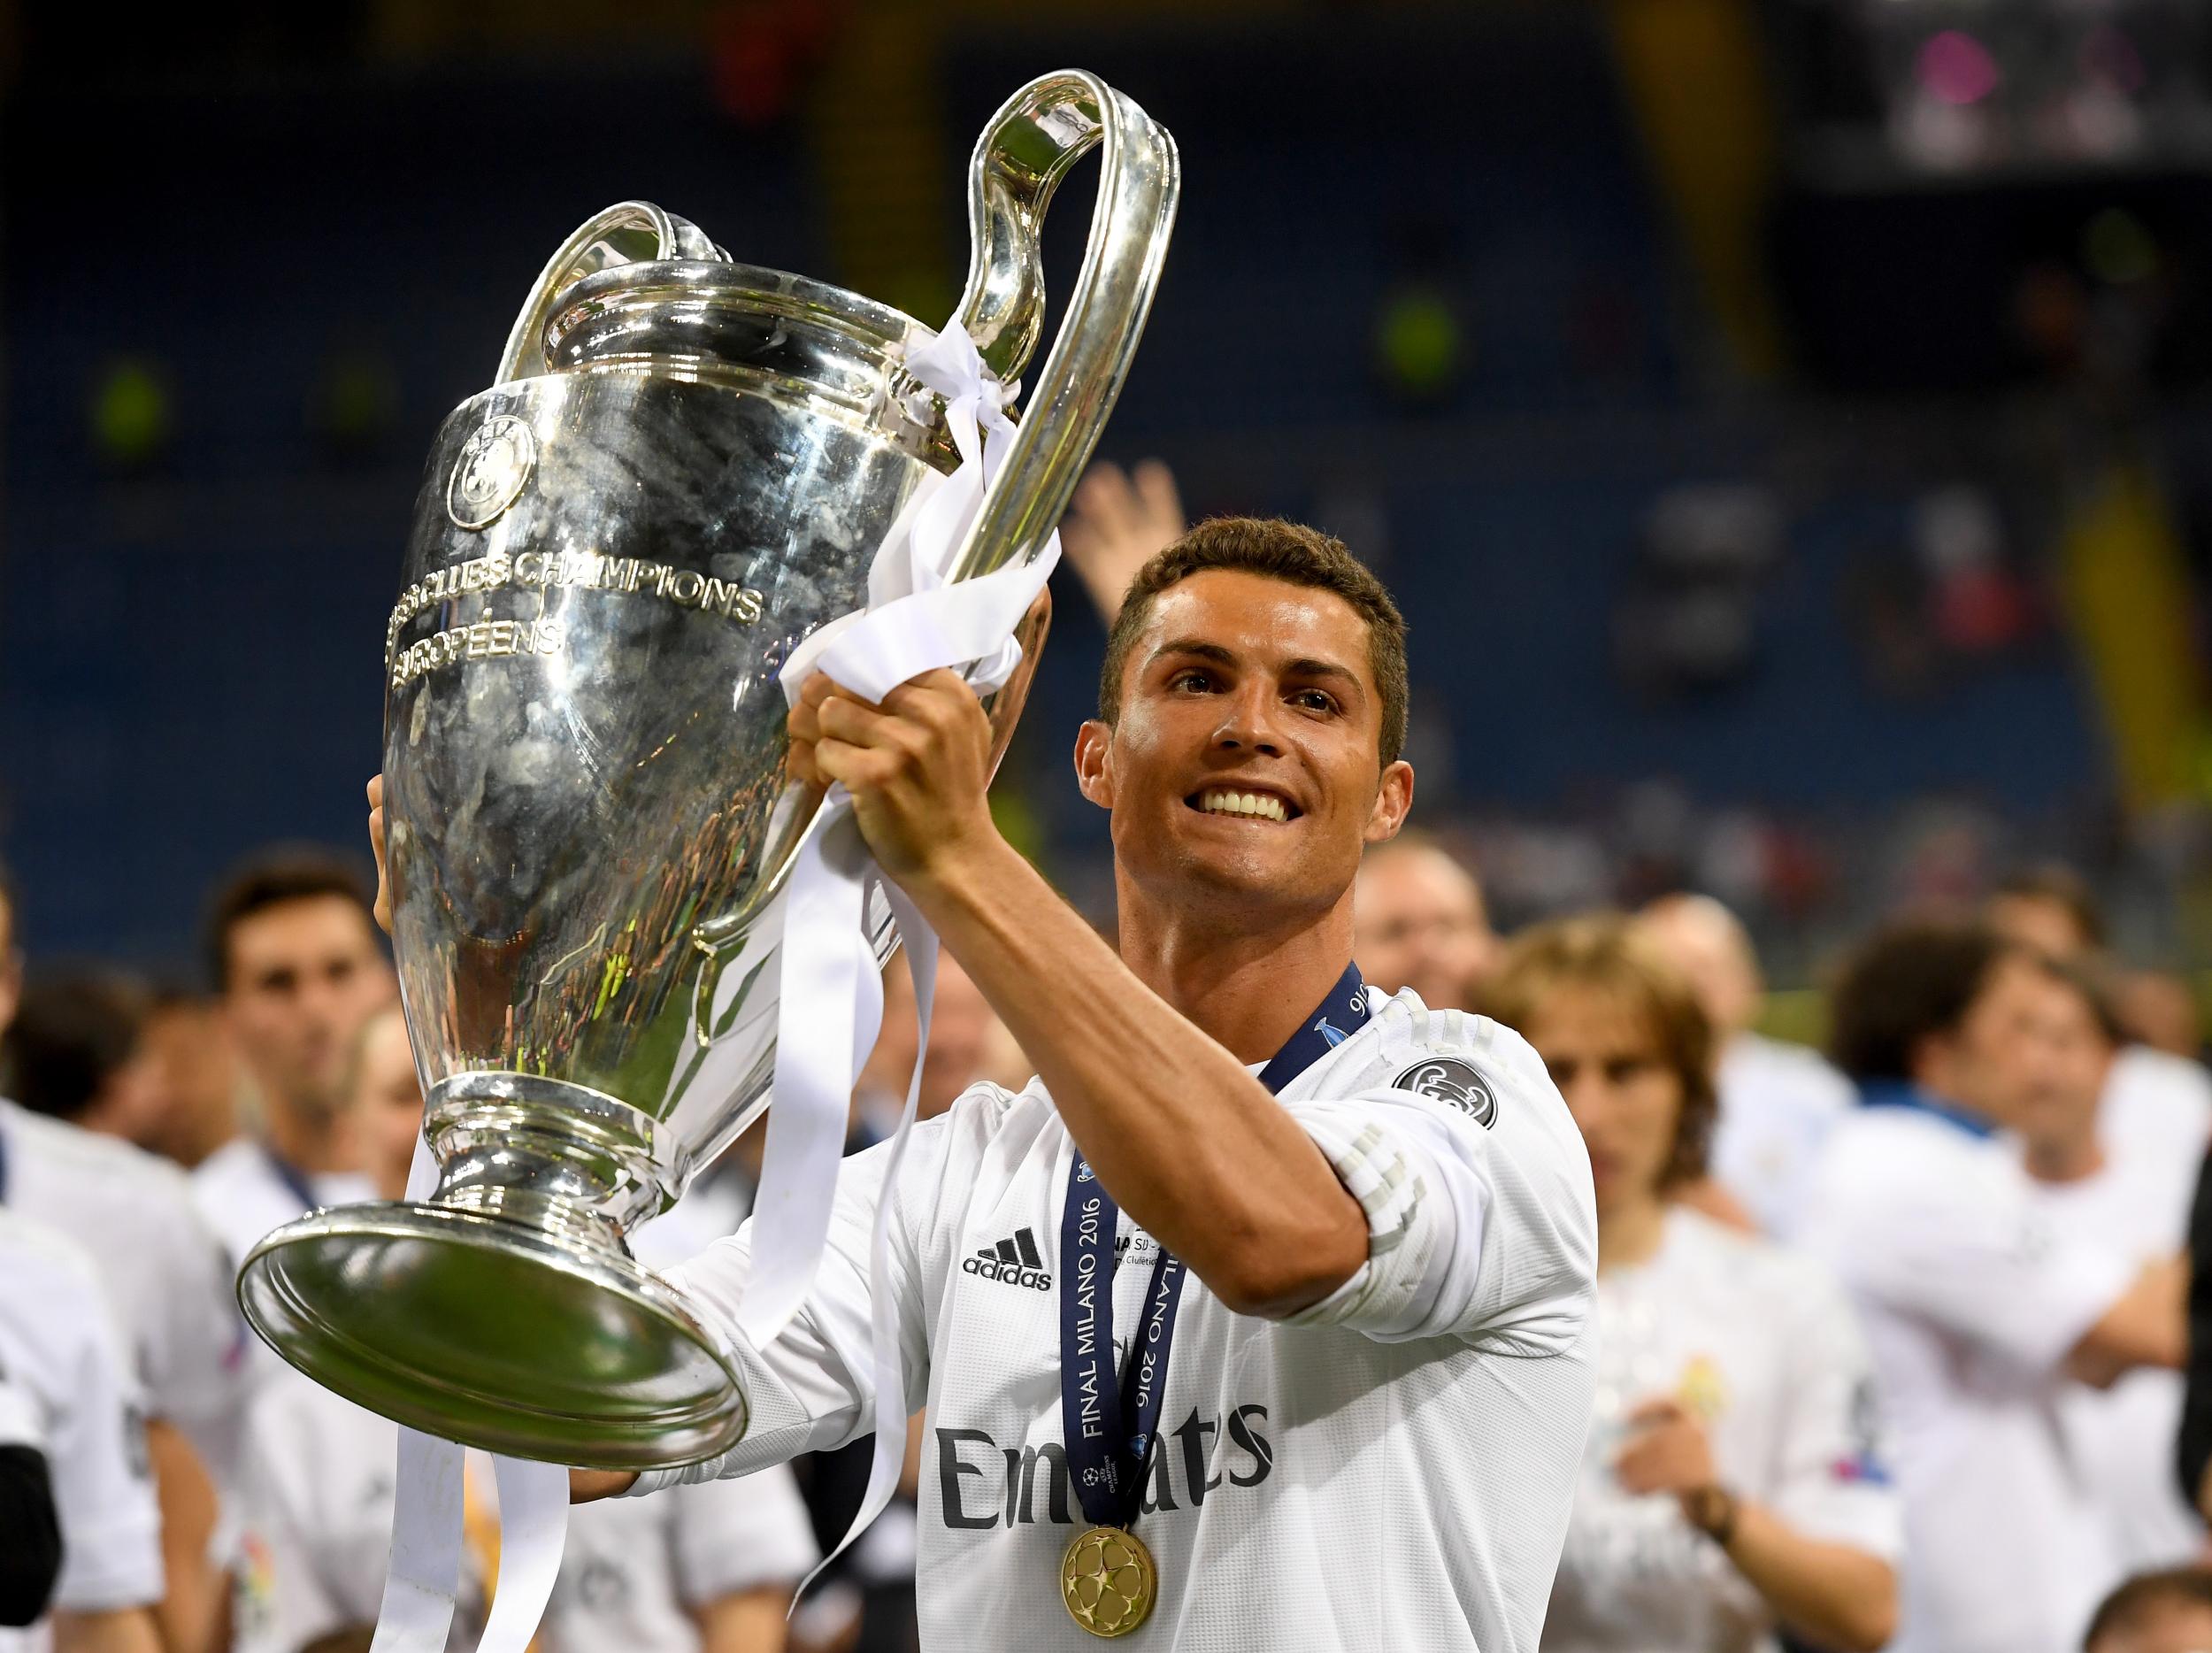 Cristiano Ronaldo is looking to pick up his fourth Champions League crown as a player